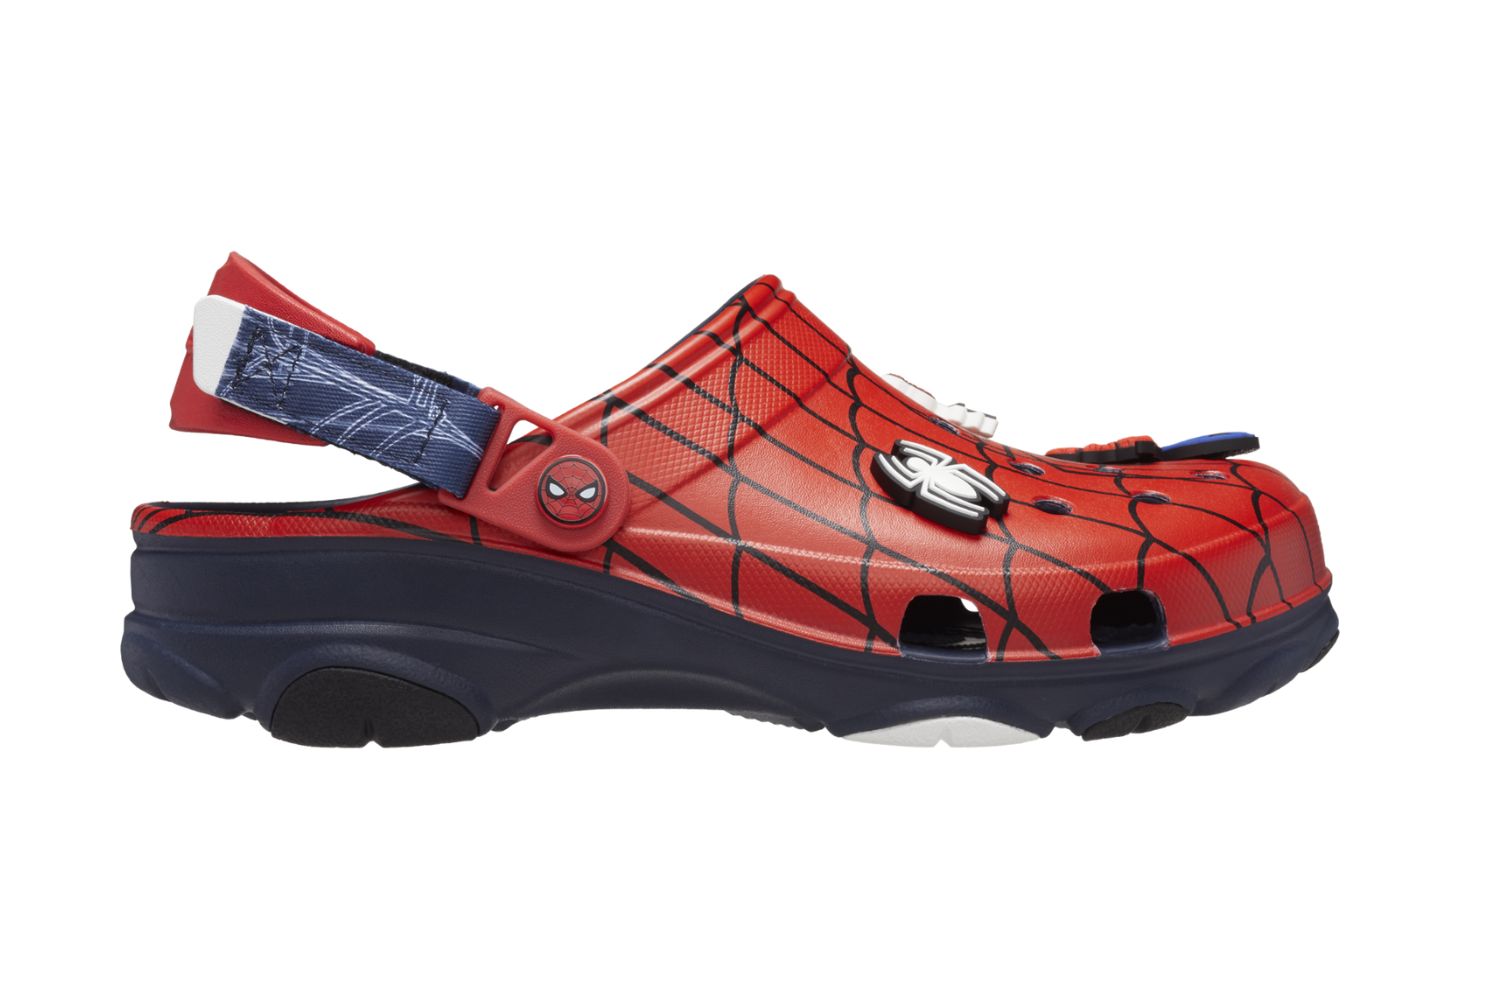 11-fascinating-facts-about-spiderman-crocs